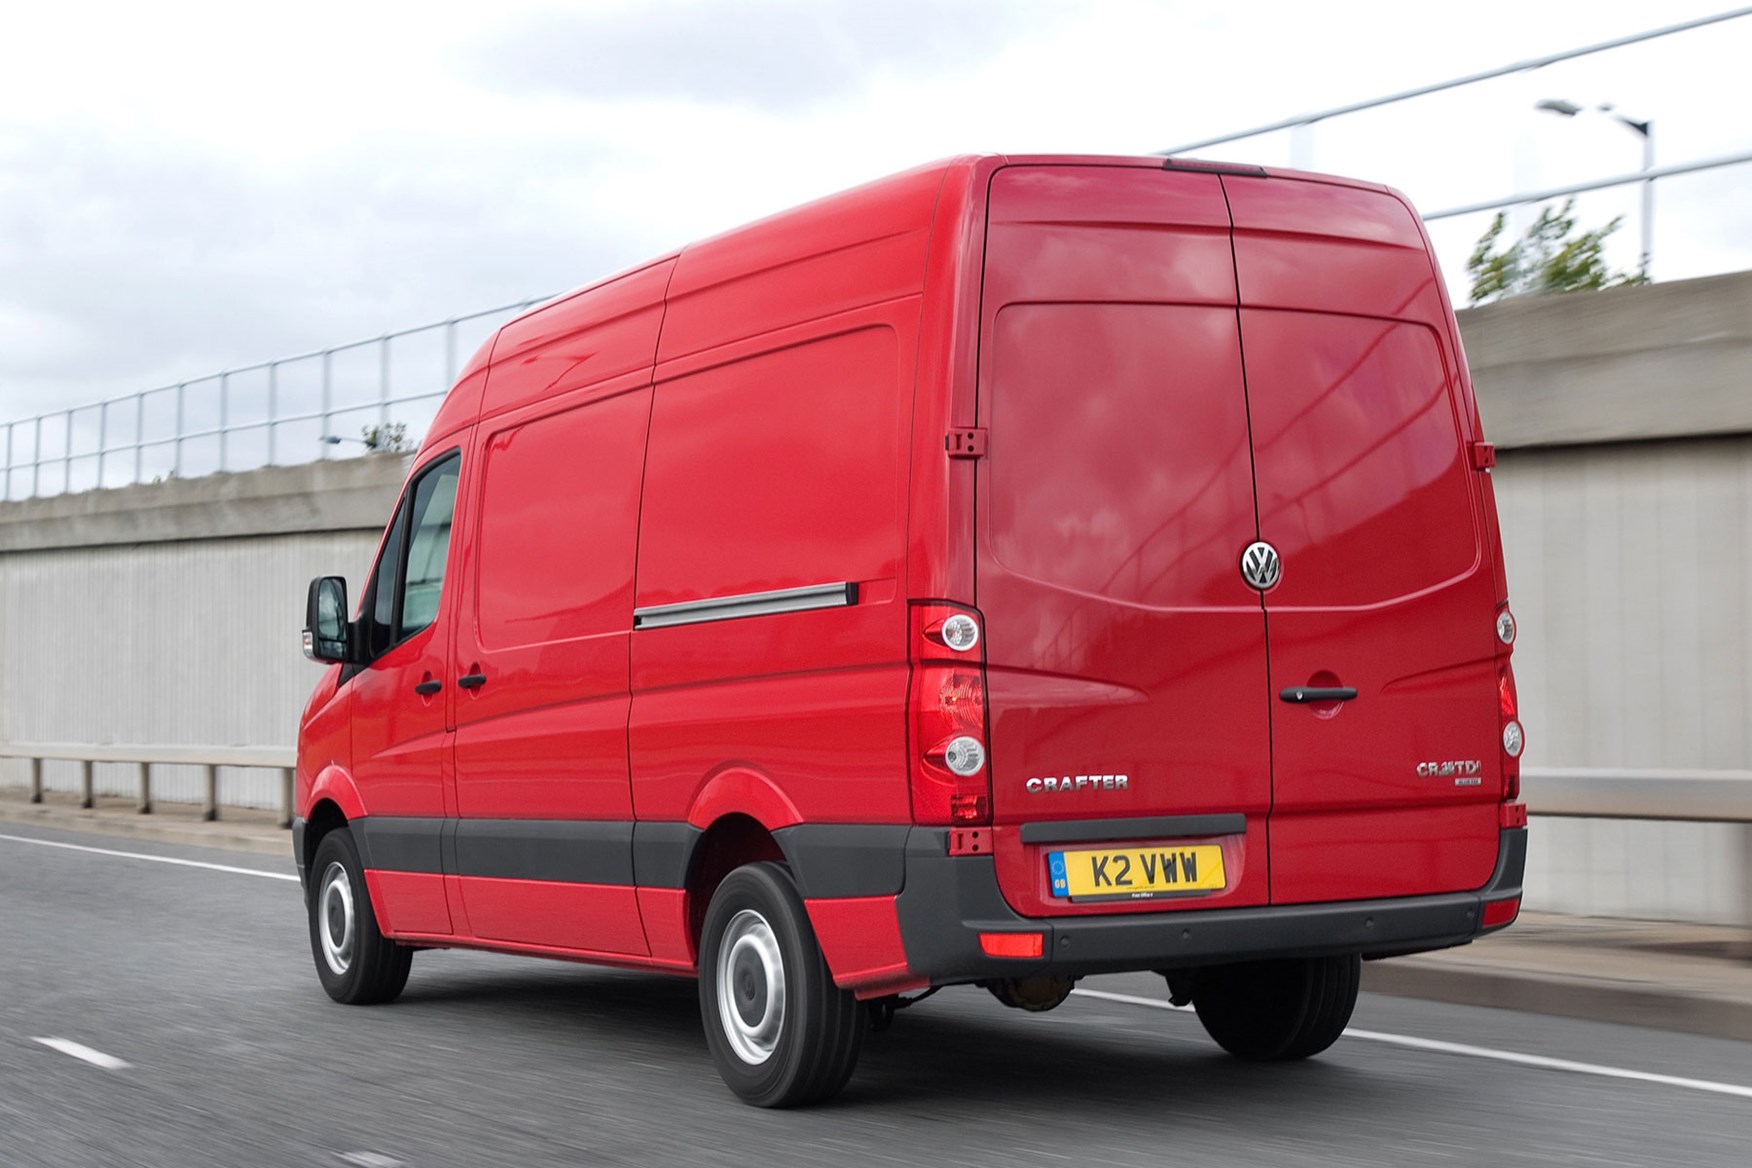 VW Crafter (1996-2003) rear view driving